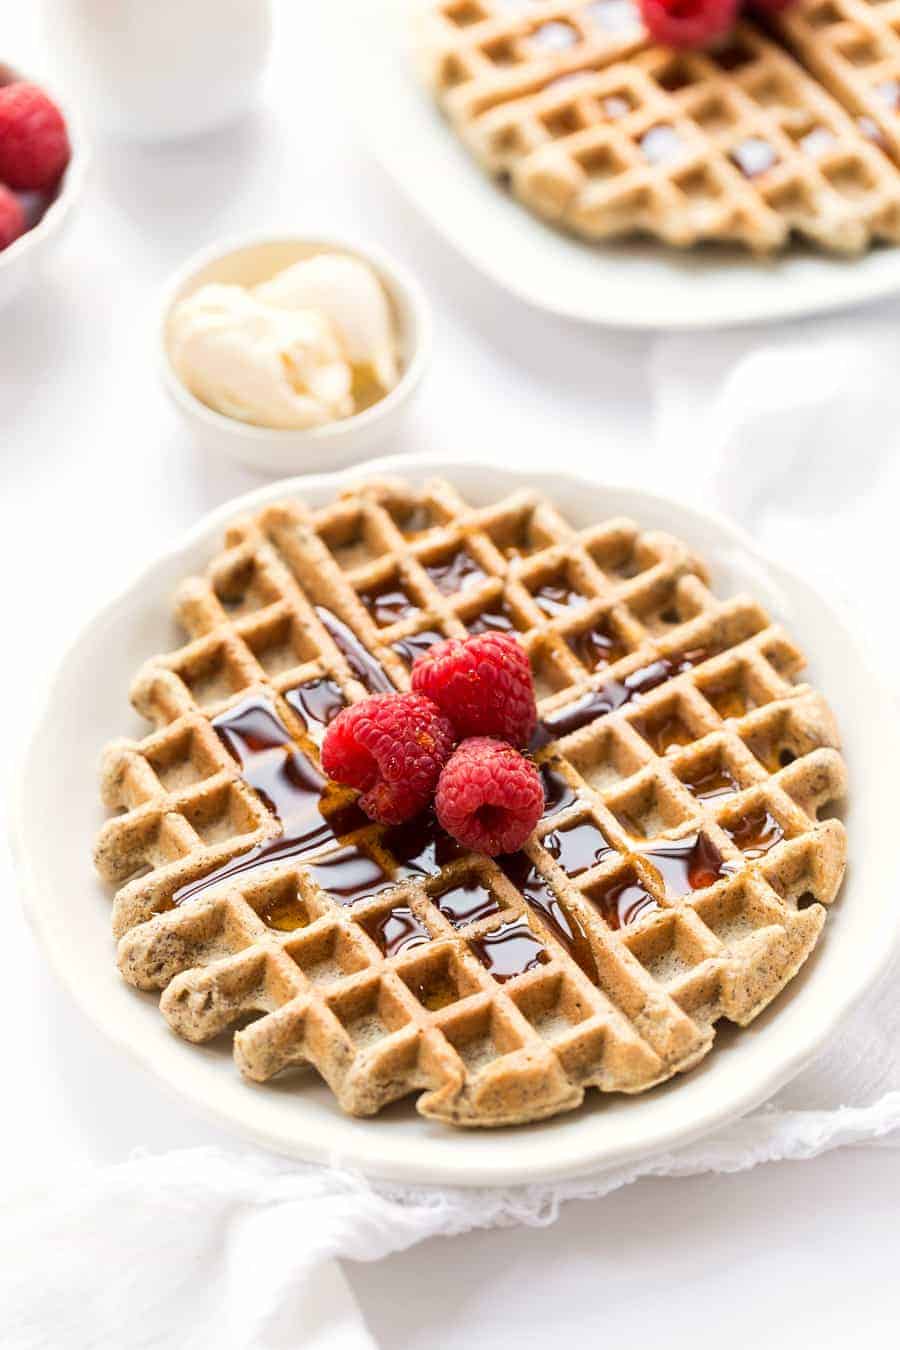 These wholesome Almond Flour Waffles are made without any added starches, are packed with protein and taste amazing!